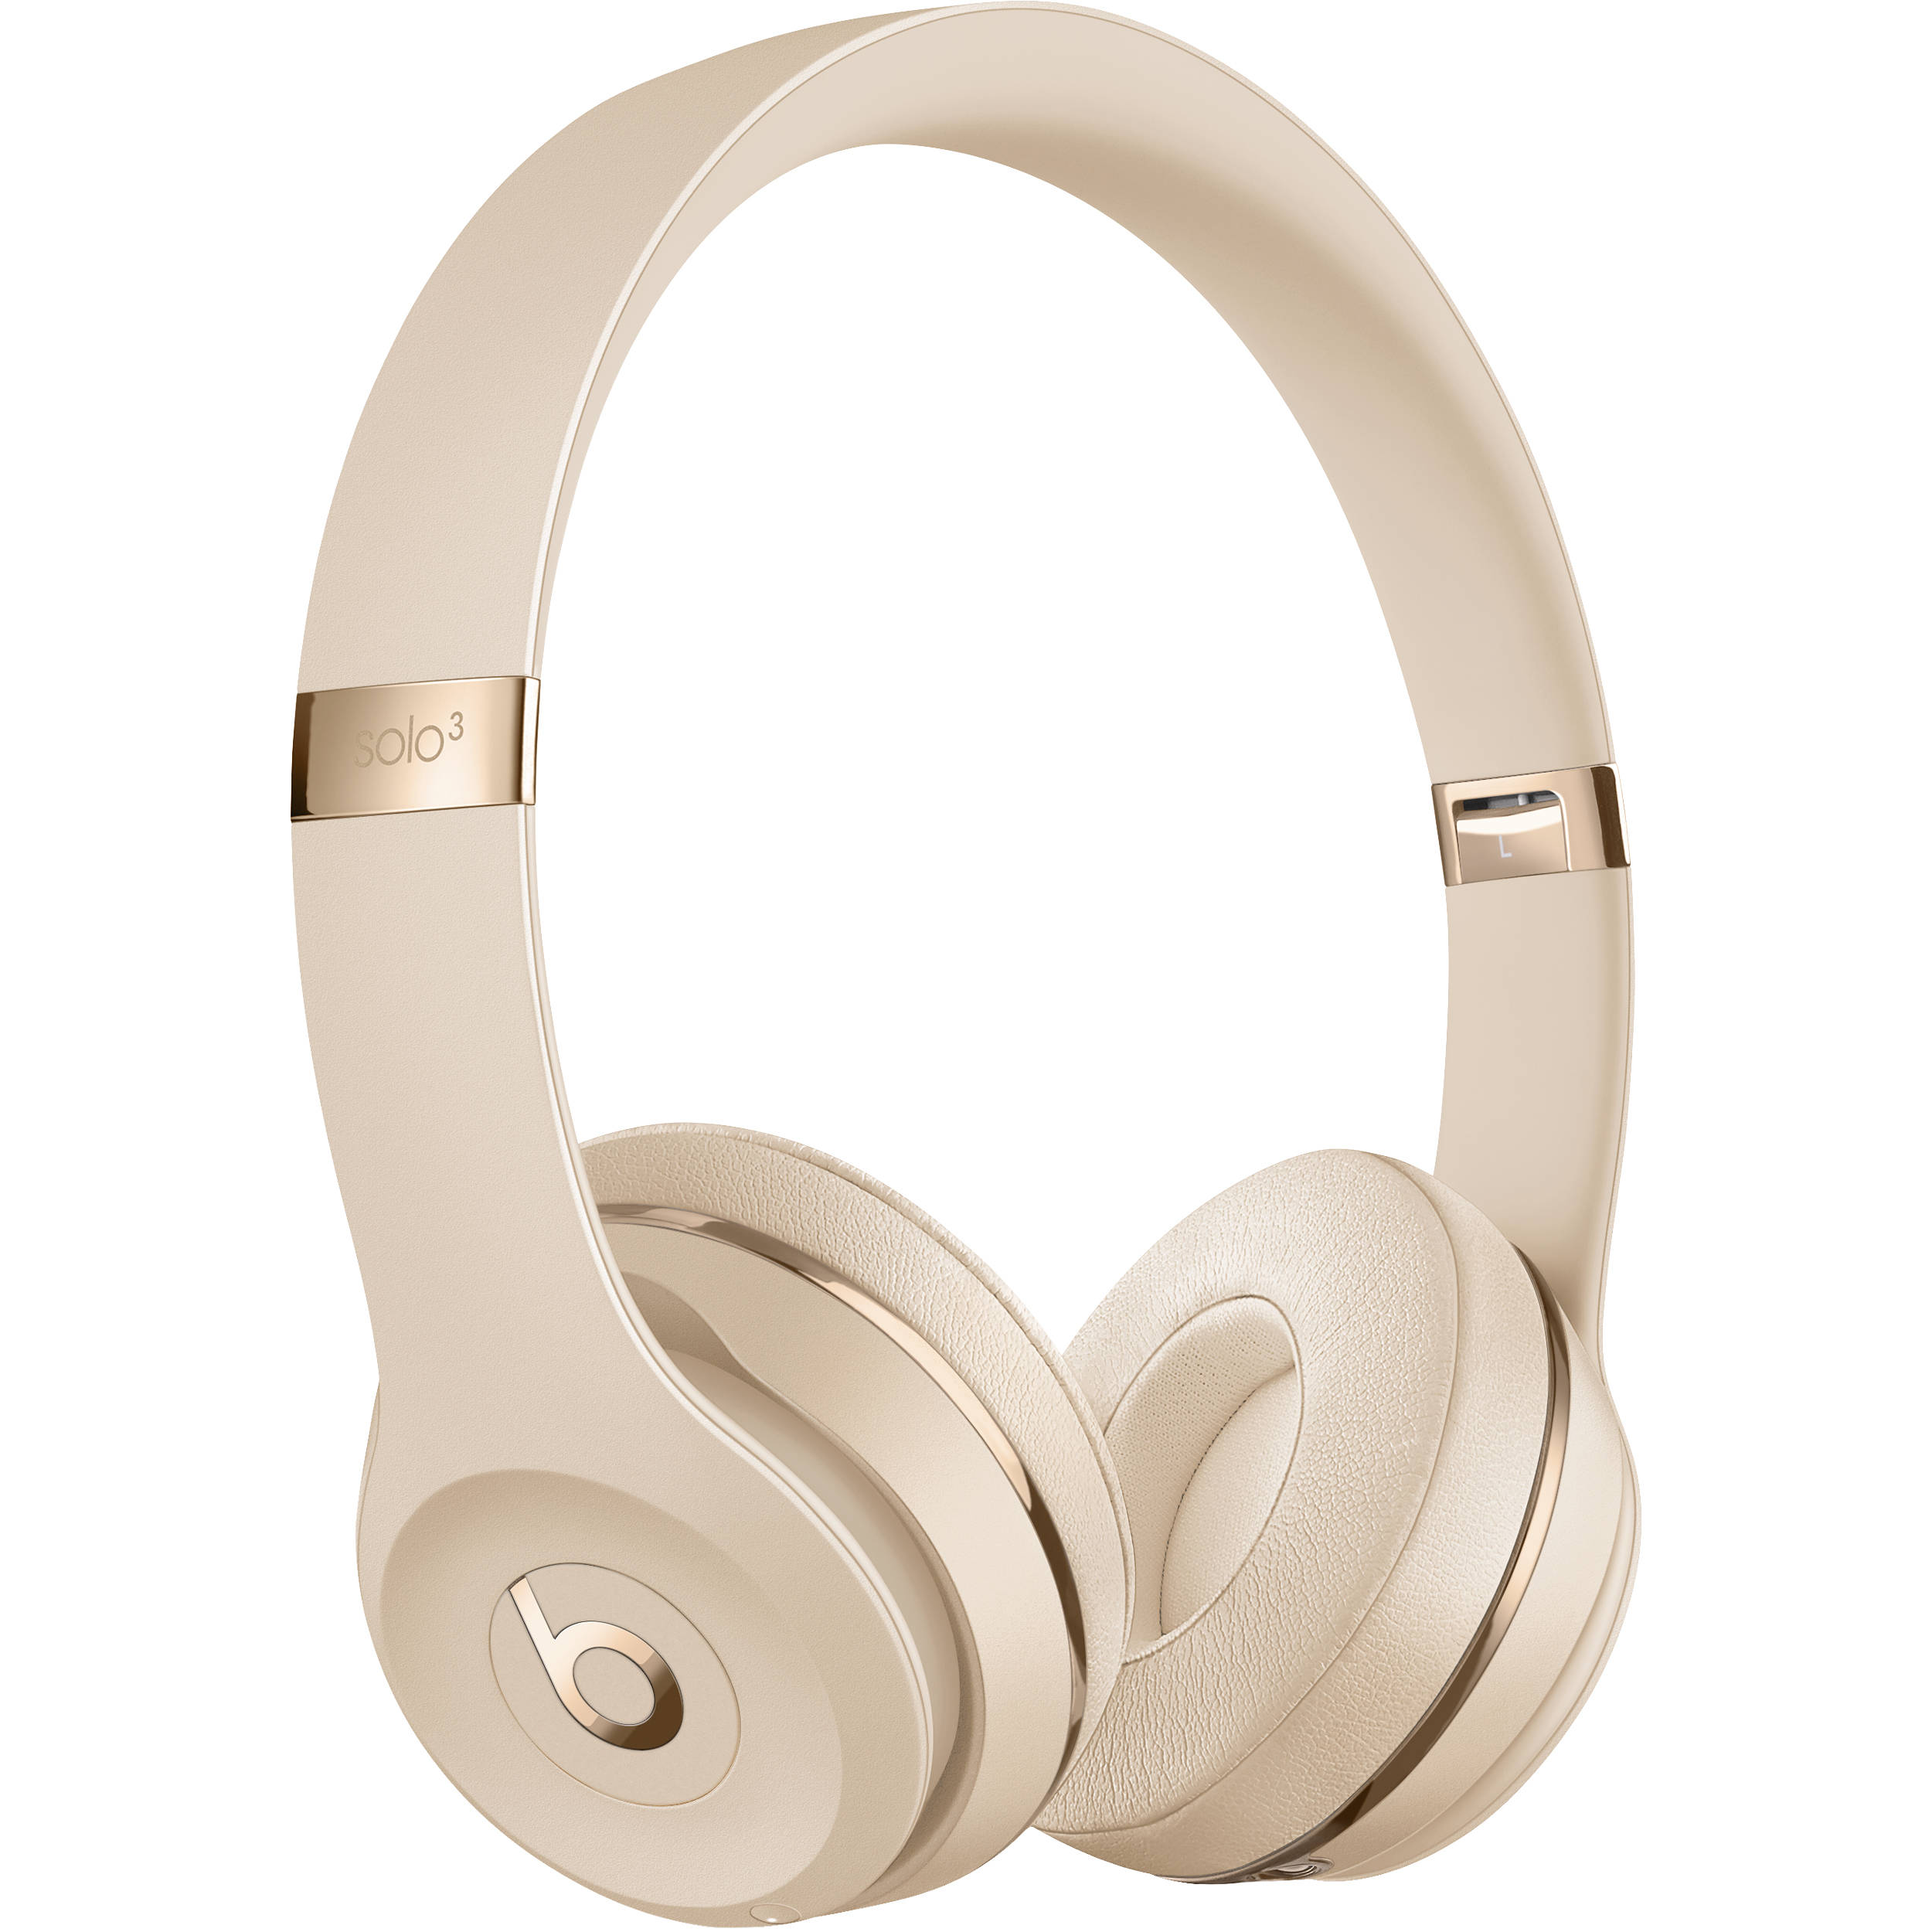 beats solo 3 wireless gold special edition